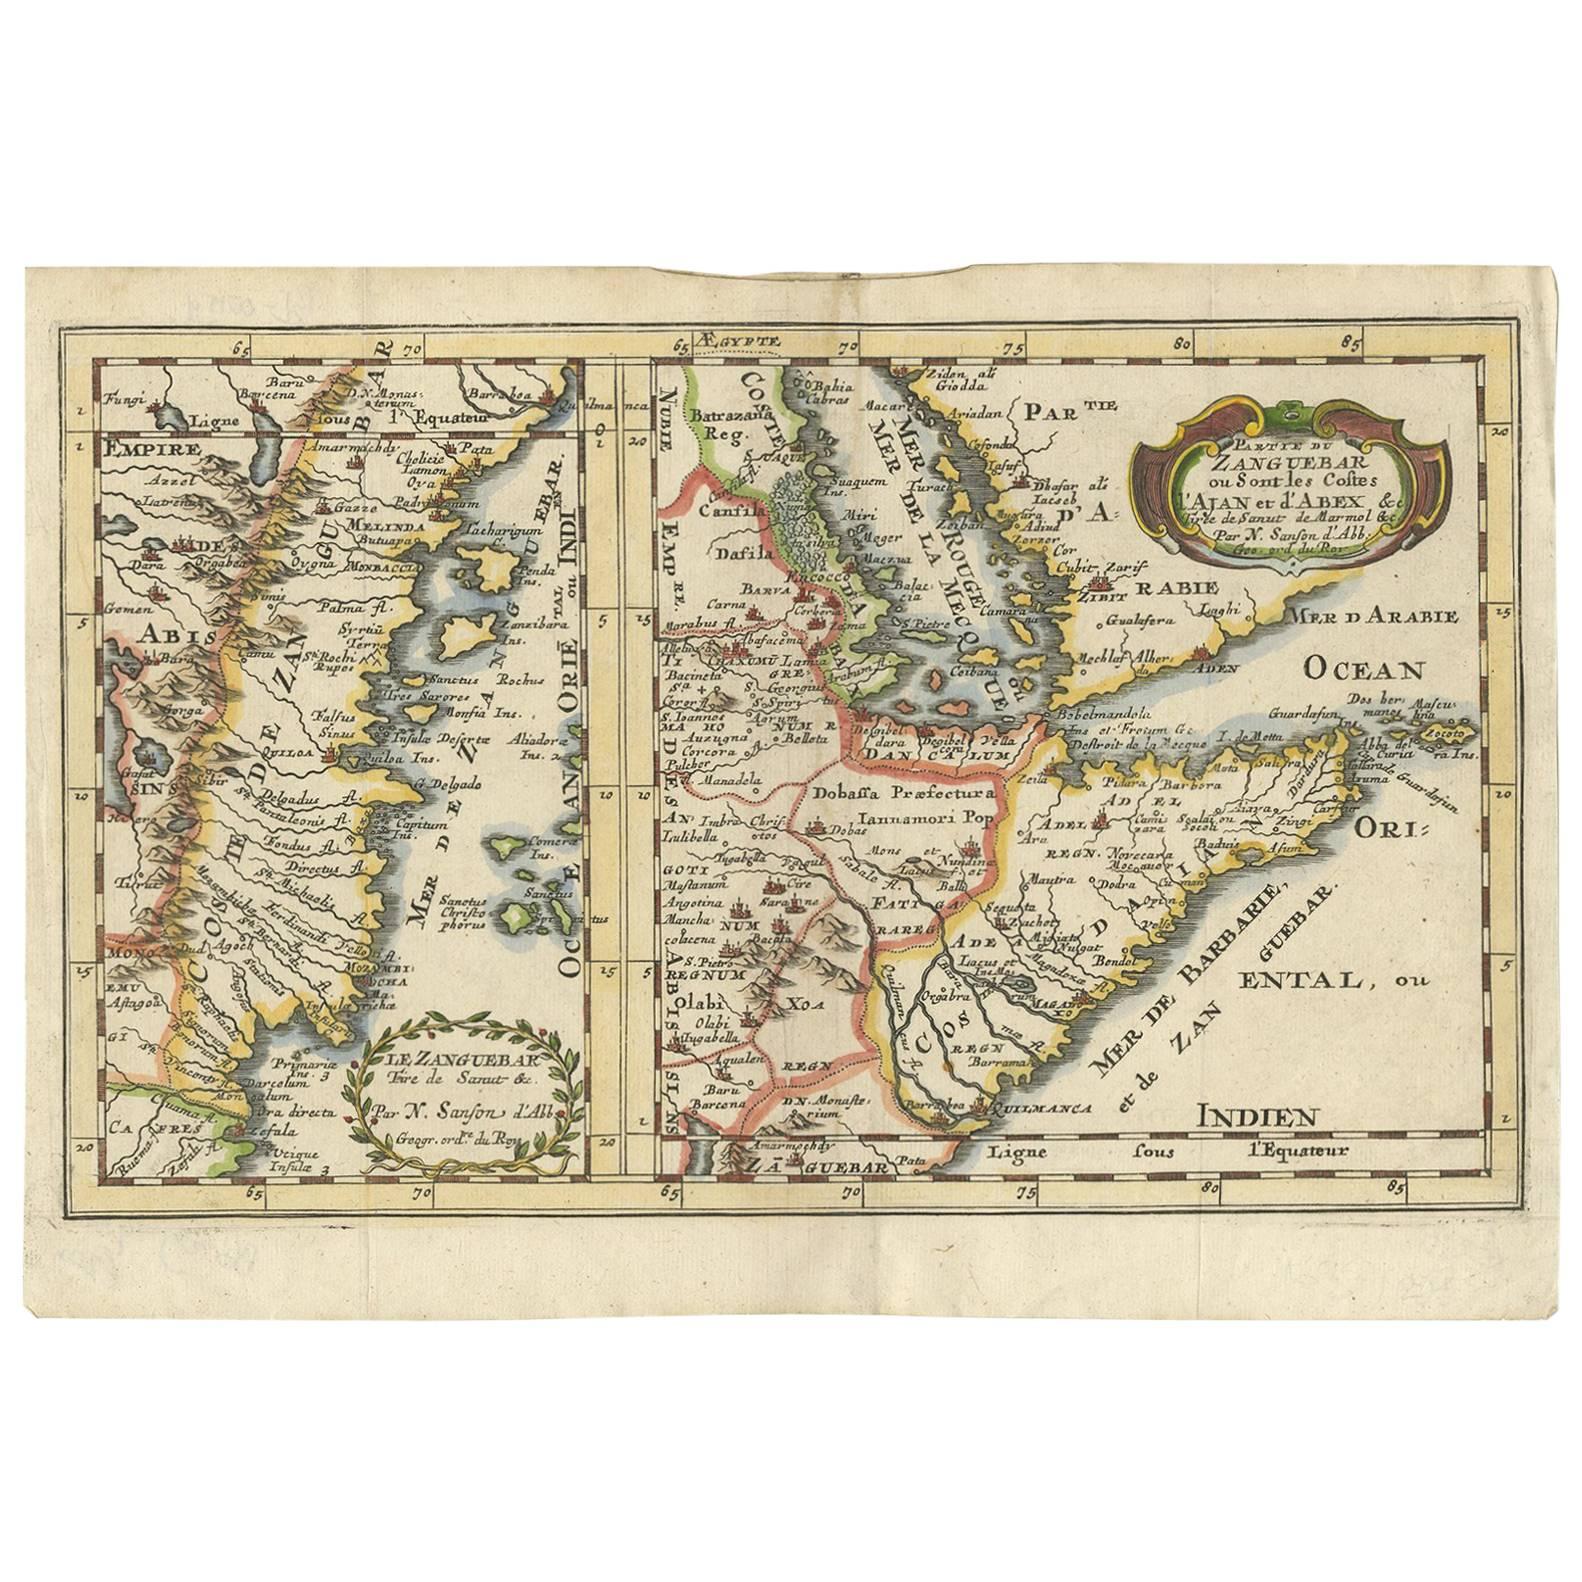 Antique Map of Zanzibar and the East African Coast by N. Sanson, circa 1690